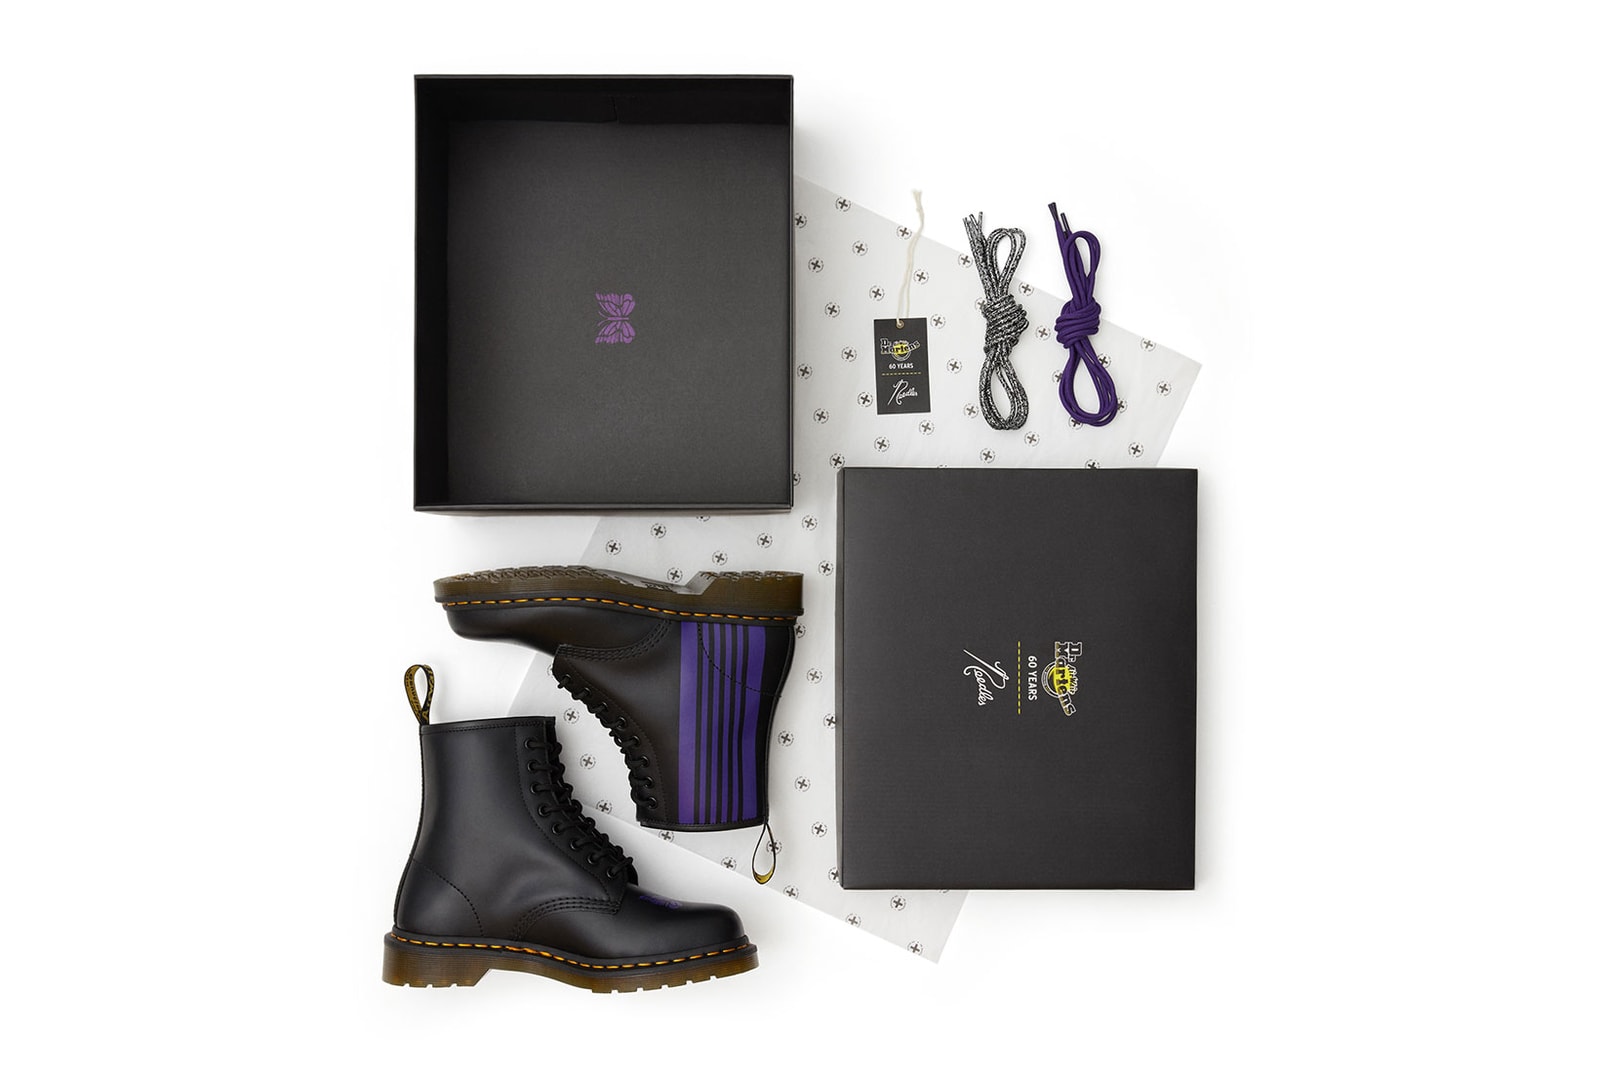 needles dr. martens 1460 remastered collaboration boots purple butterflies 